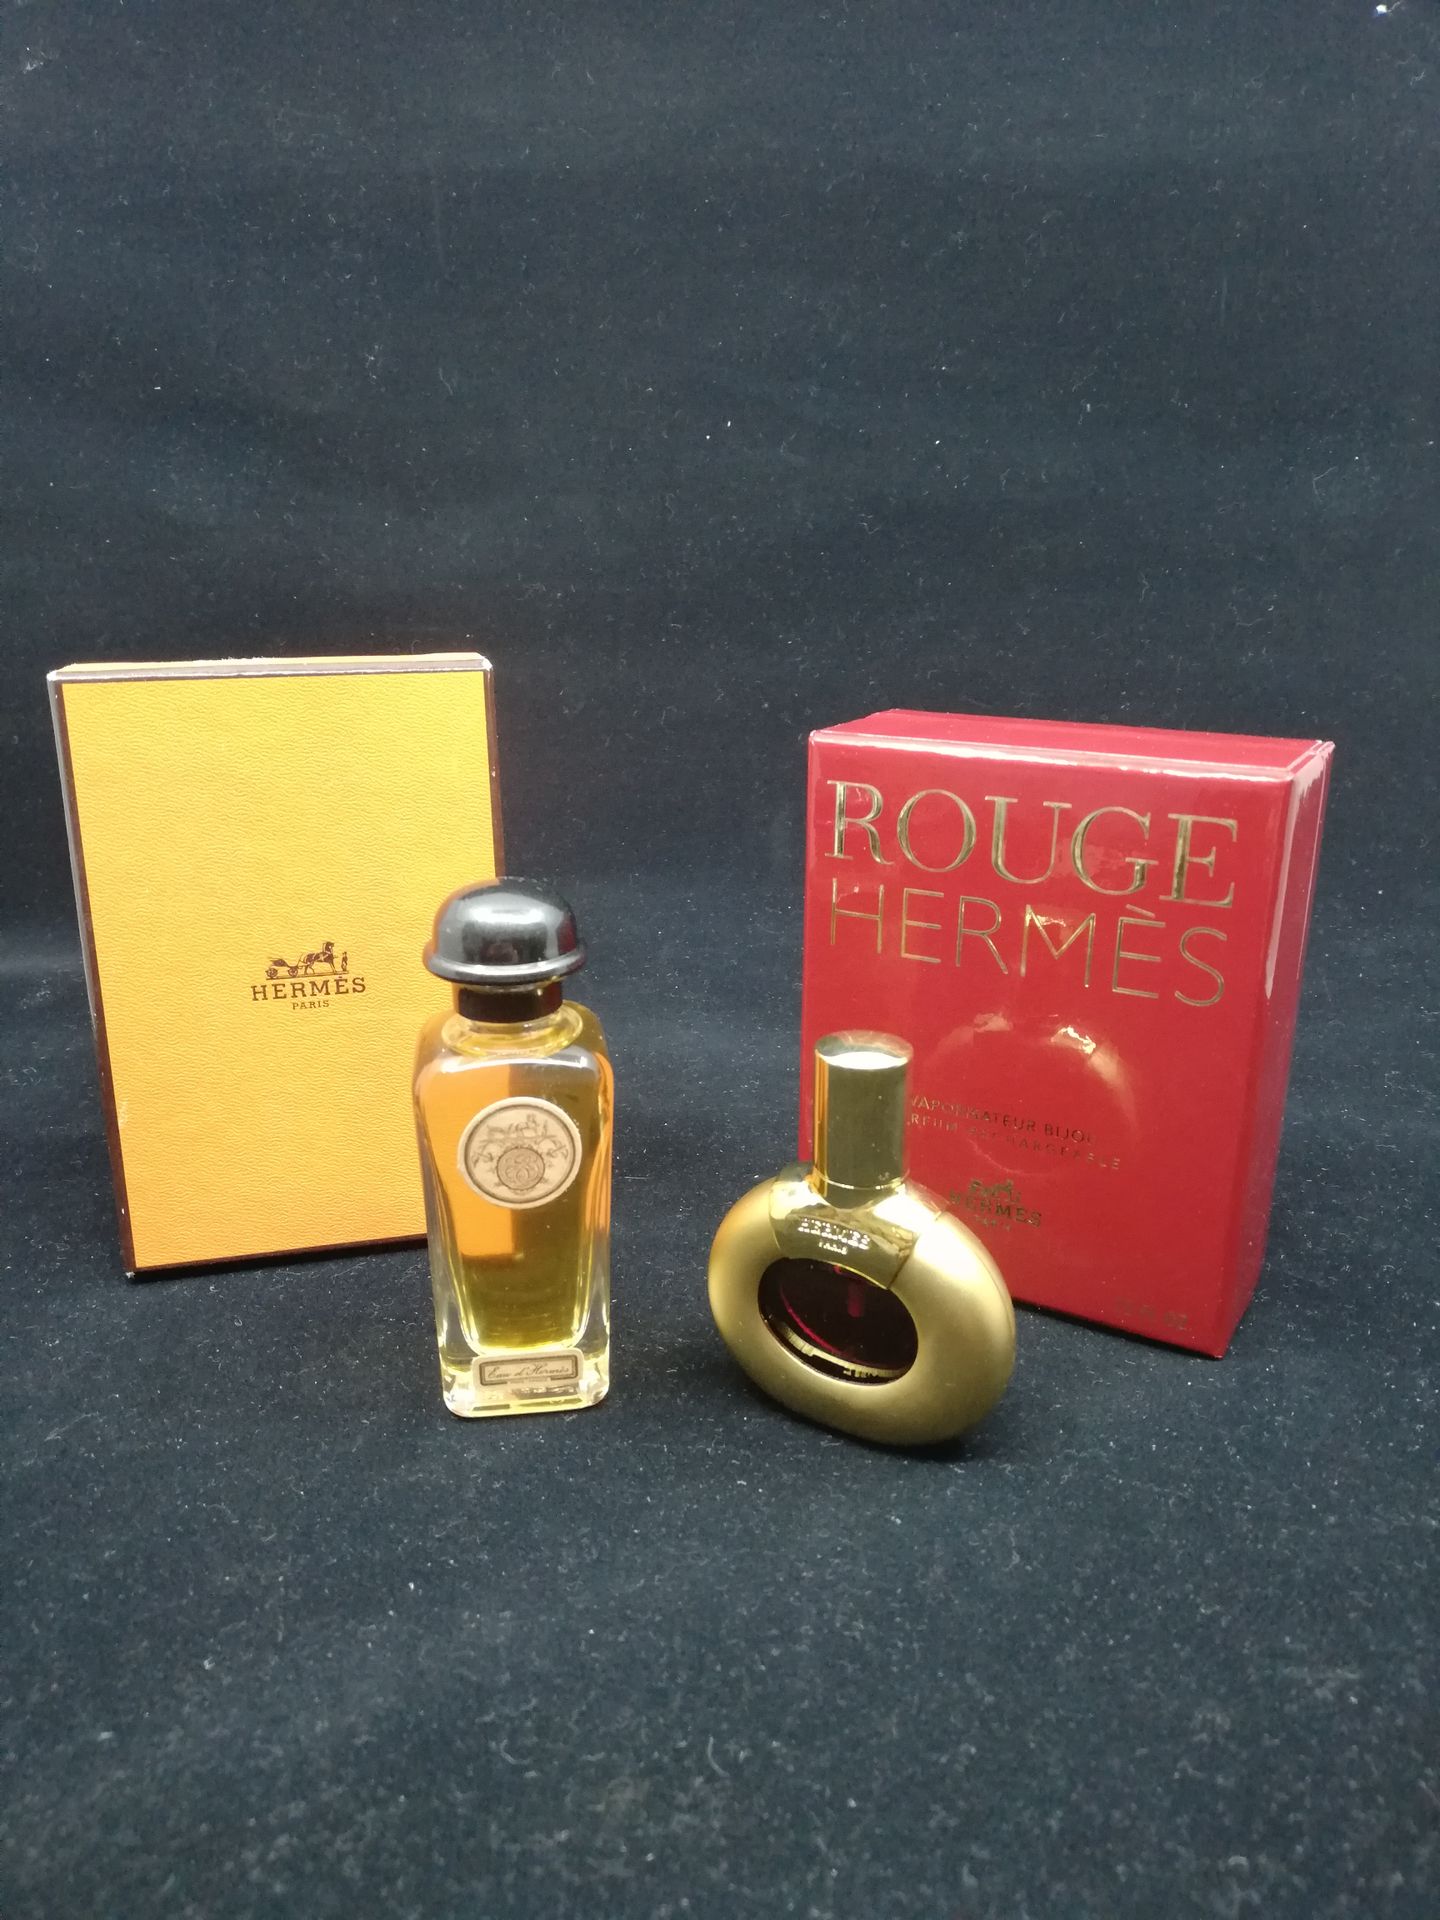 Null Hermès - (1990's)

Lot including a bag spray bottle containing 7.5ml of "Ro&hellip;